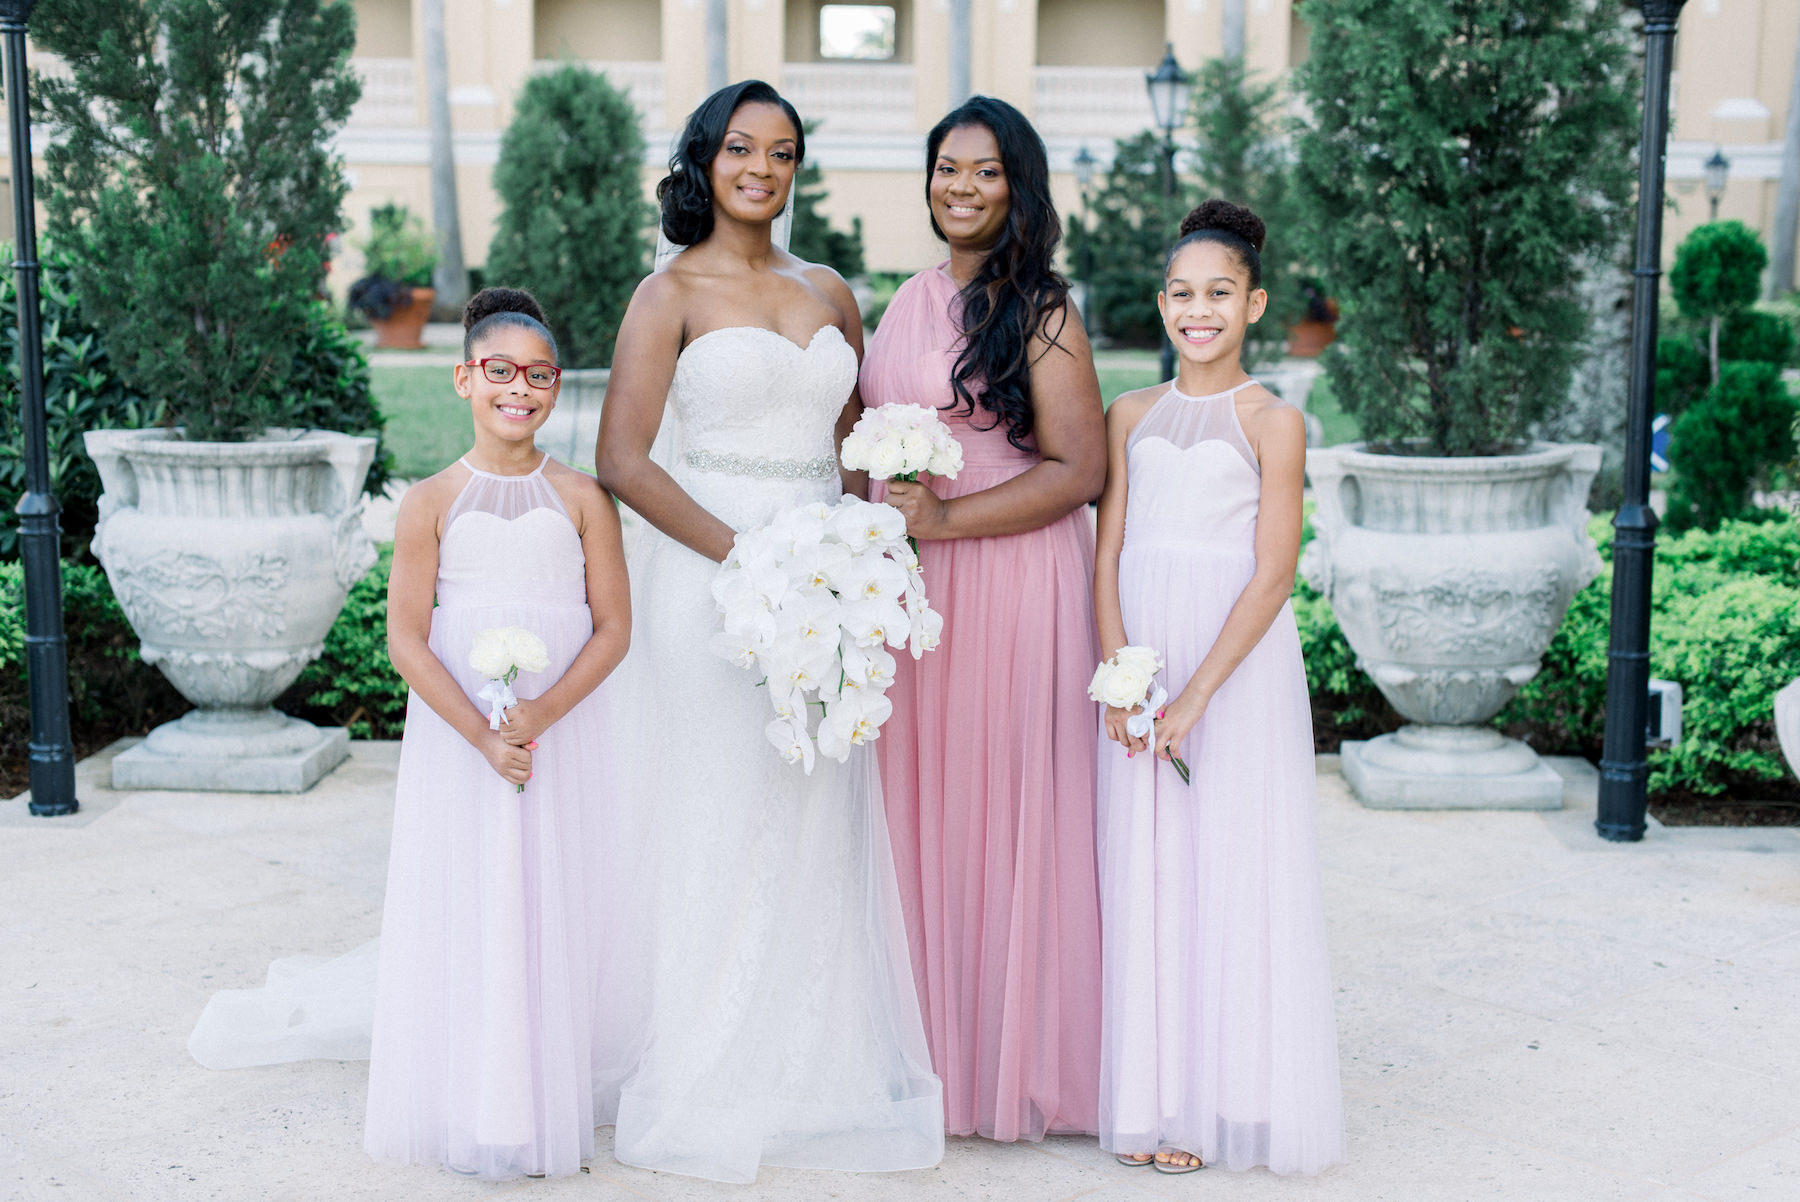 Classic Florida Bride in Strapless Sweetheart Neckline Lace Wedding Dress with Rhinestone Belt Holding White Orchid Floral Bouquet, Bridesmaids in Pink Dress, Flower Girls in Blush Pink Dresses | Tampa Bay Wedding Planner Special Moments Event Planning